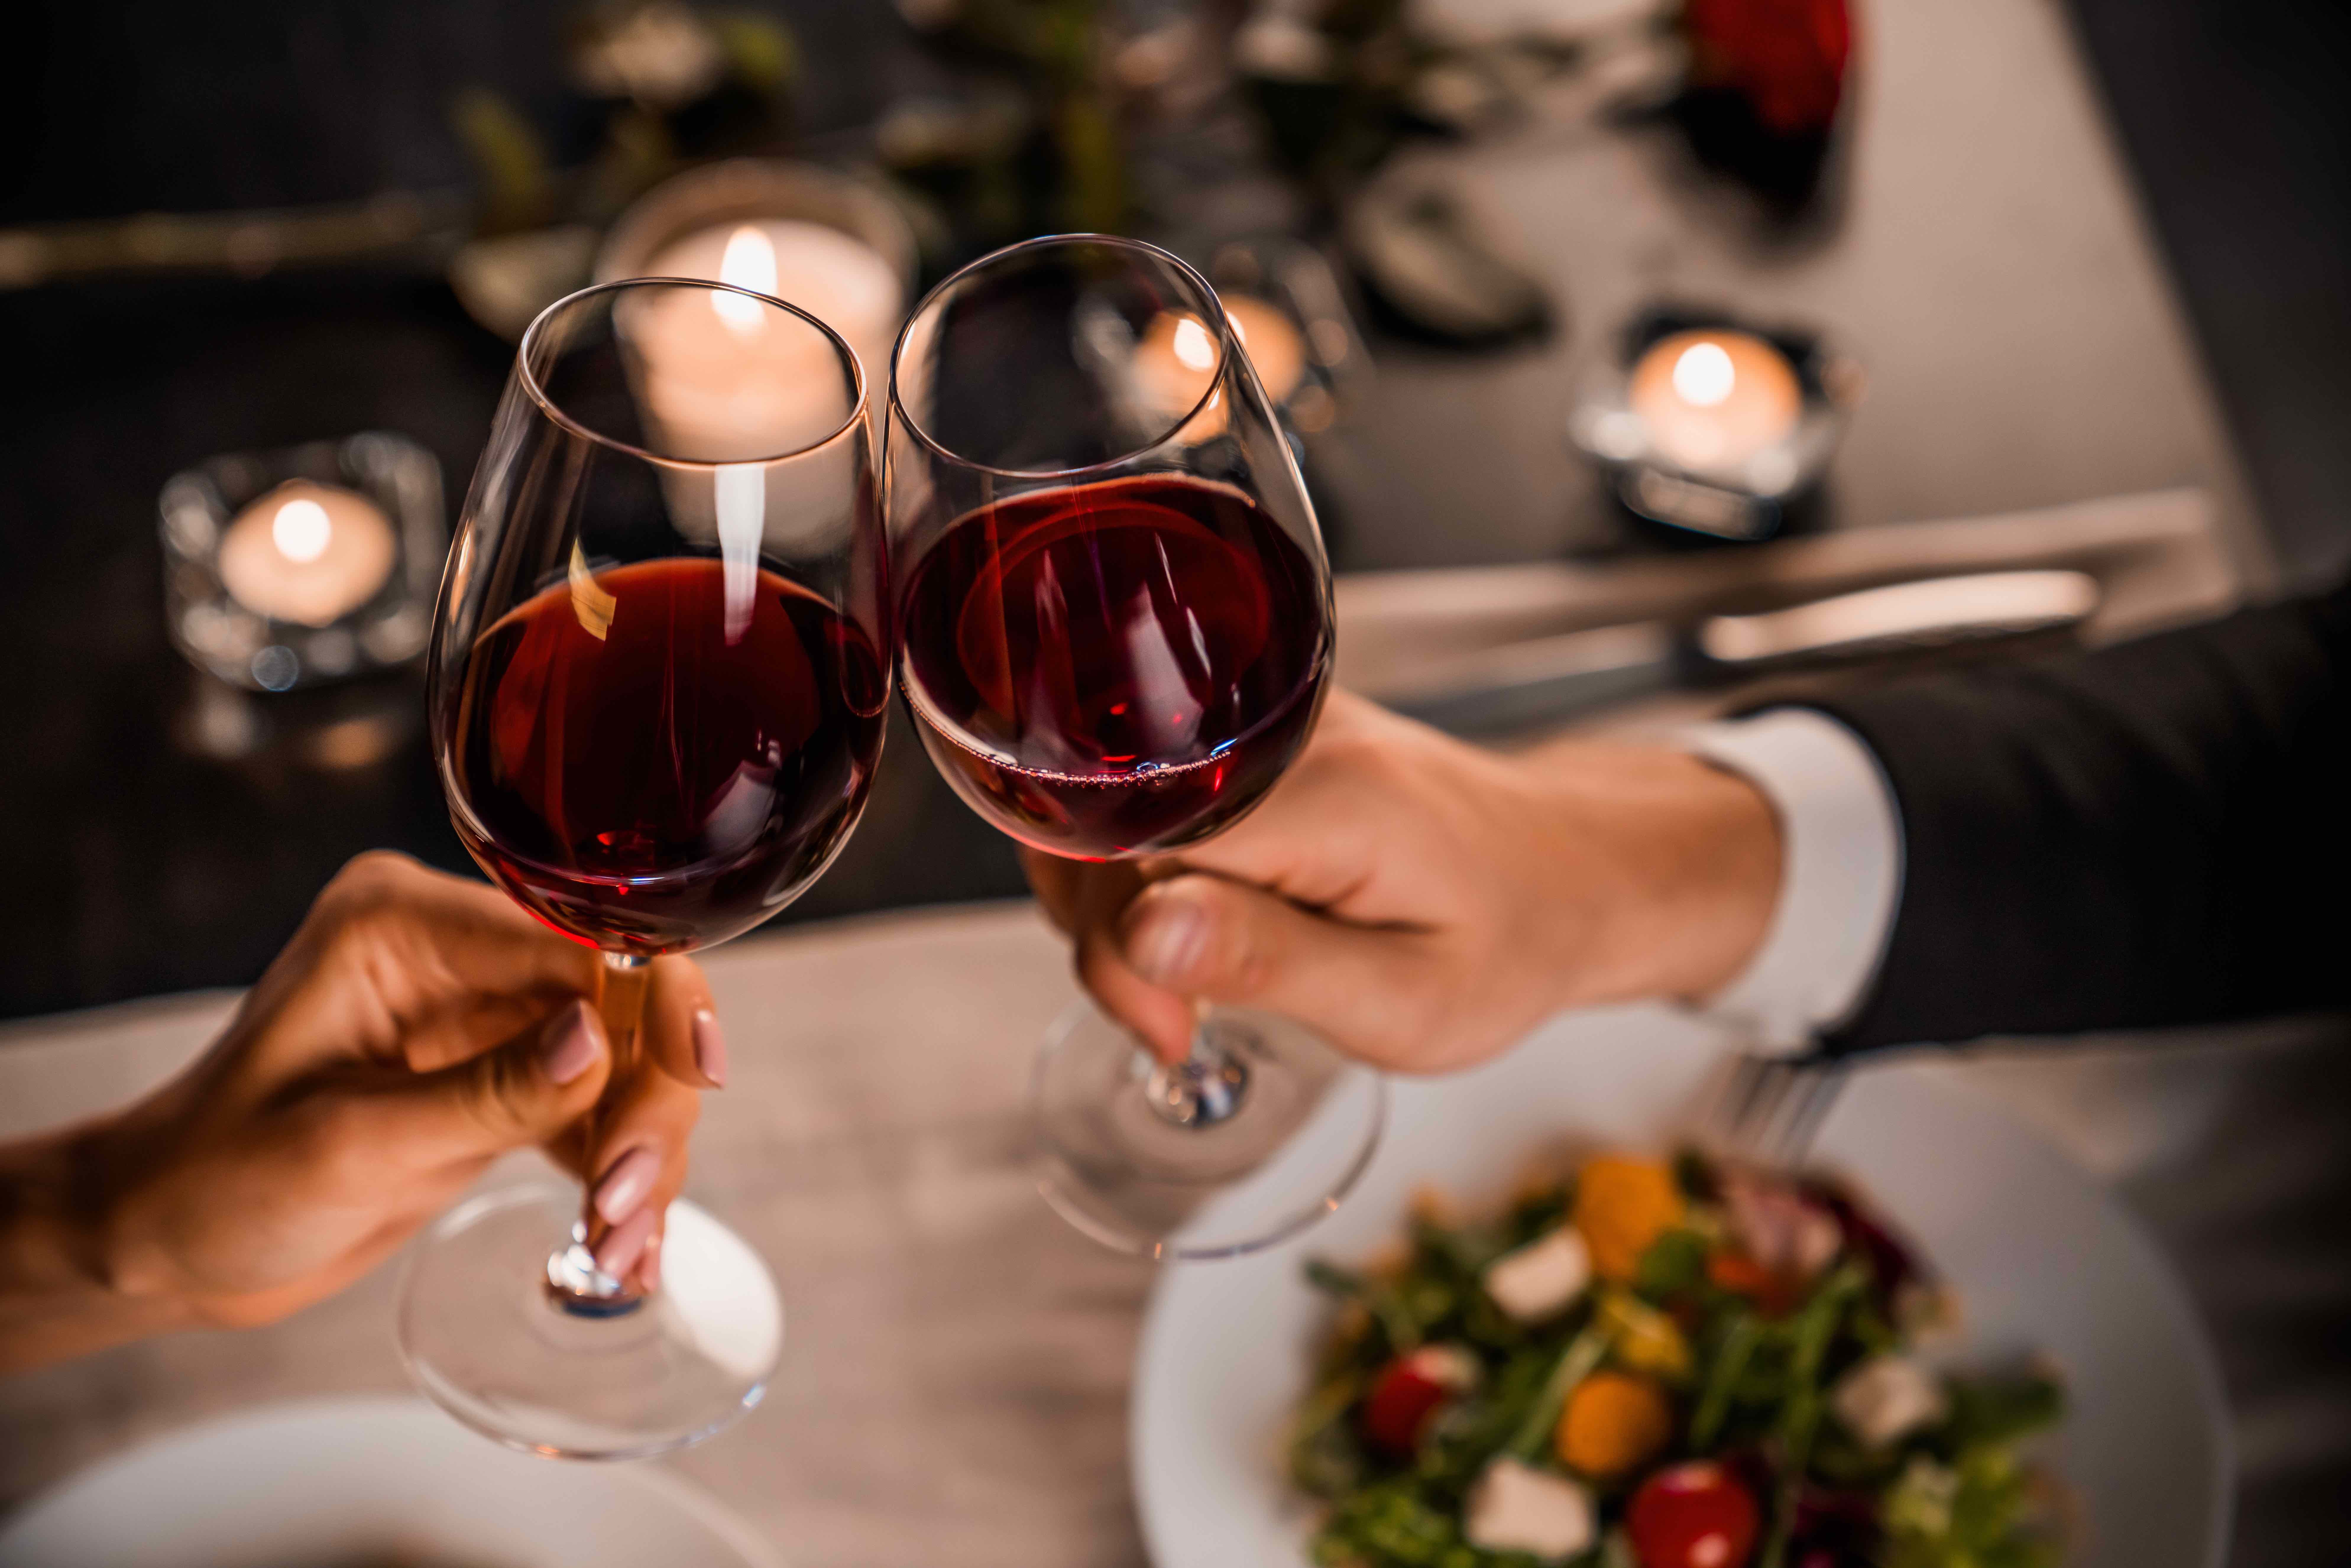 two hands holding glasses with red wine over a table